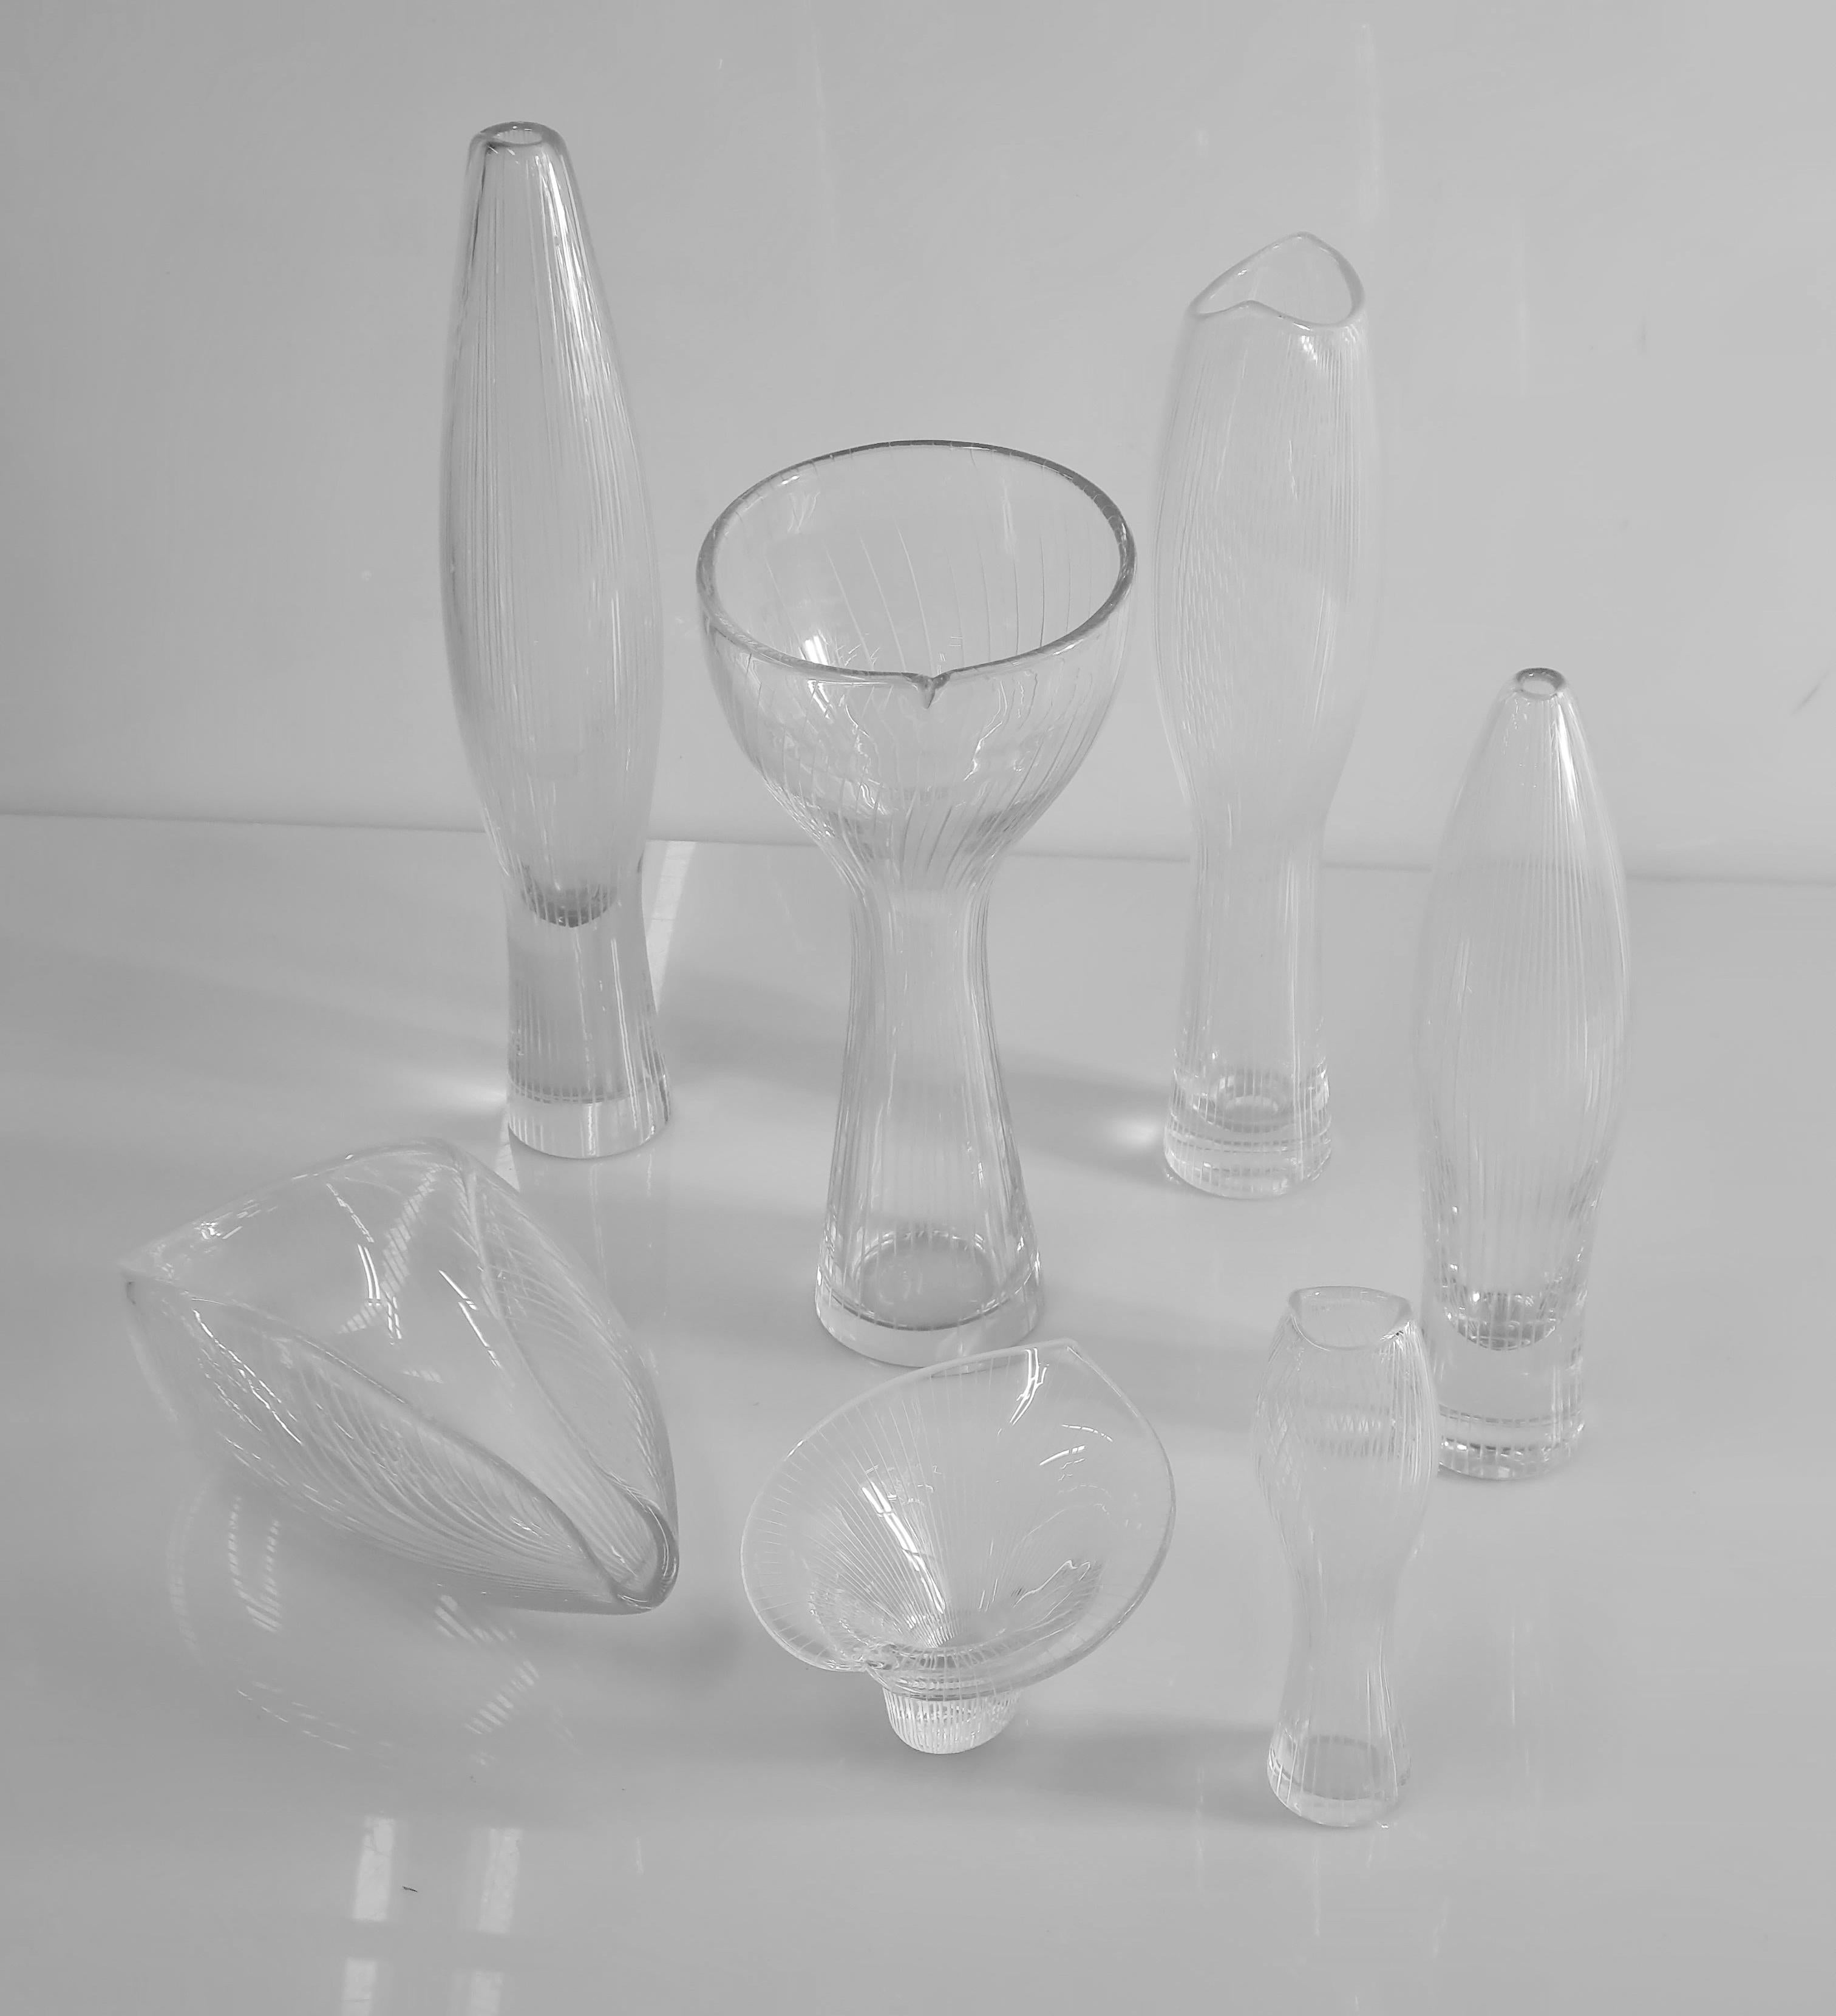 A Variety of Art Glass Objects by Tapio Wirkkala for Iittala, 1950s For Sale 7